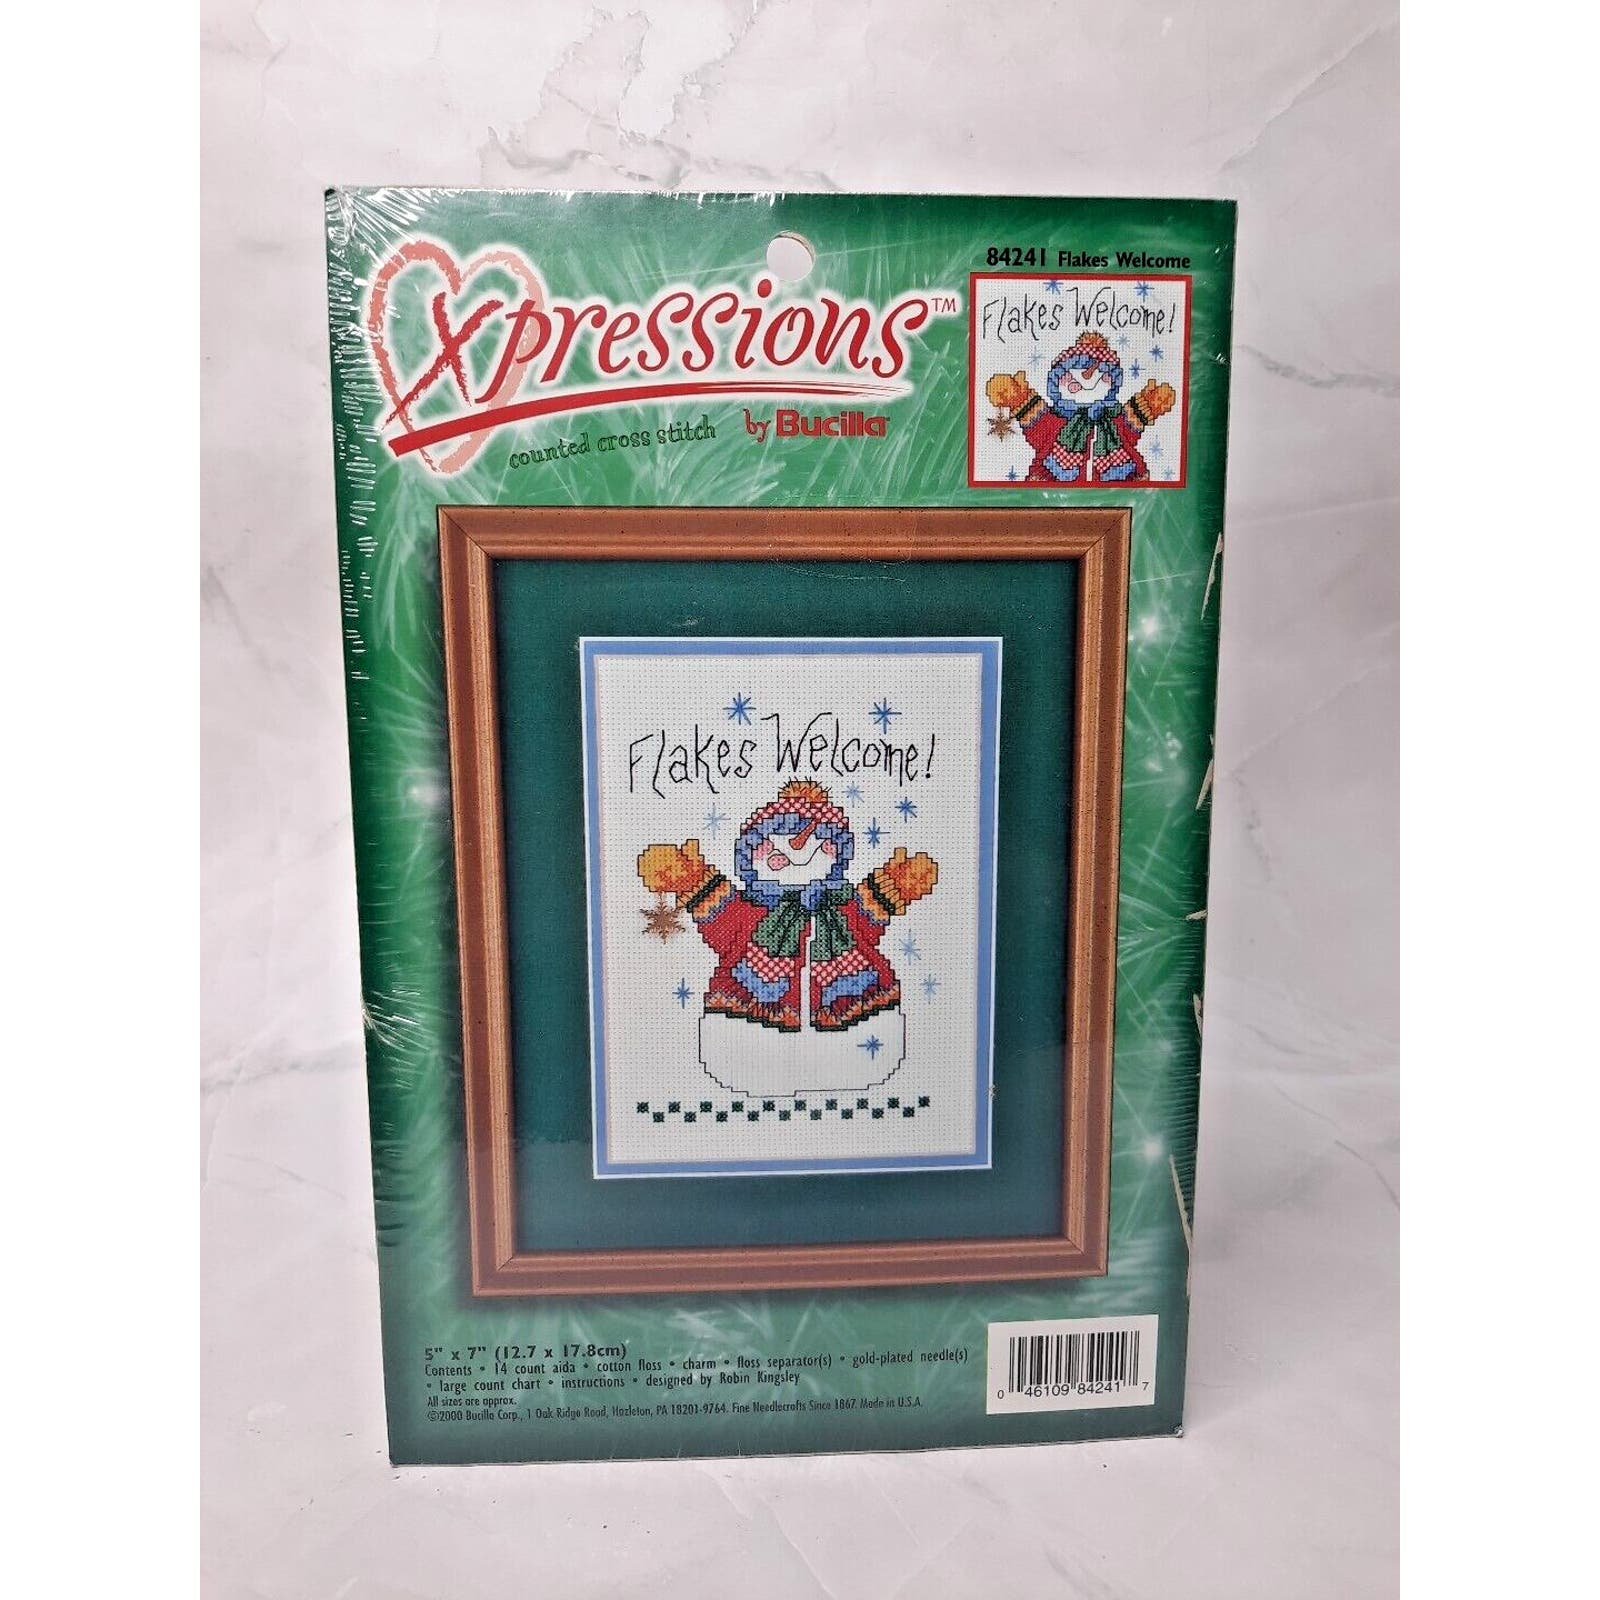 Xpressions by Bucilla Counted Cross Stitch Kit Flakes Welcome 84241 Snowman 5x7 bbUJzl05Z